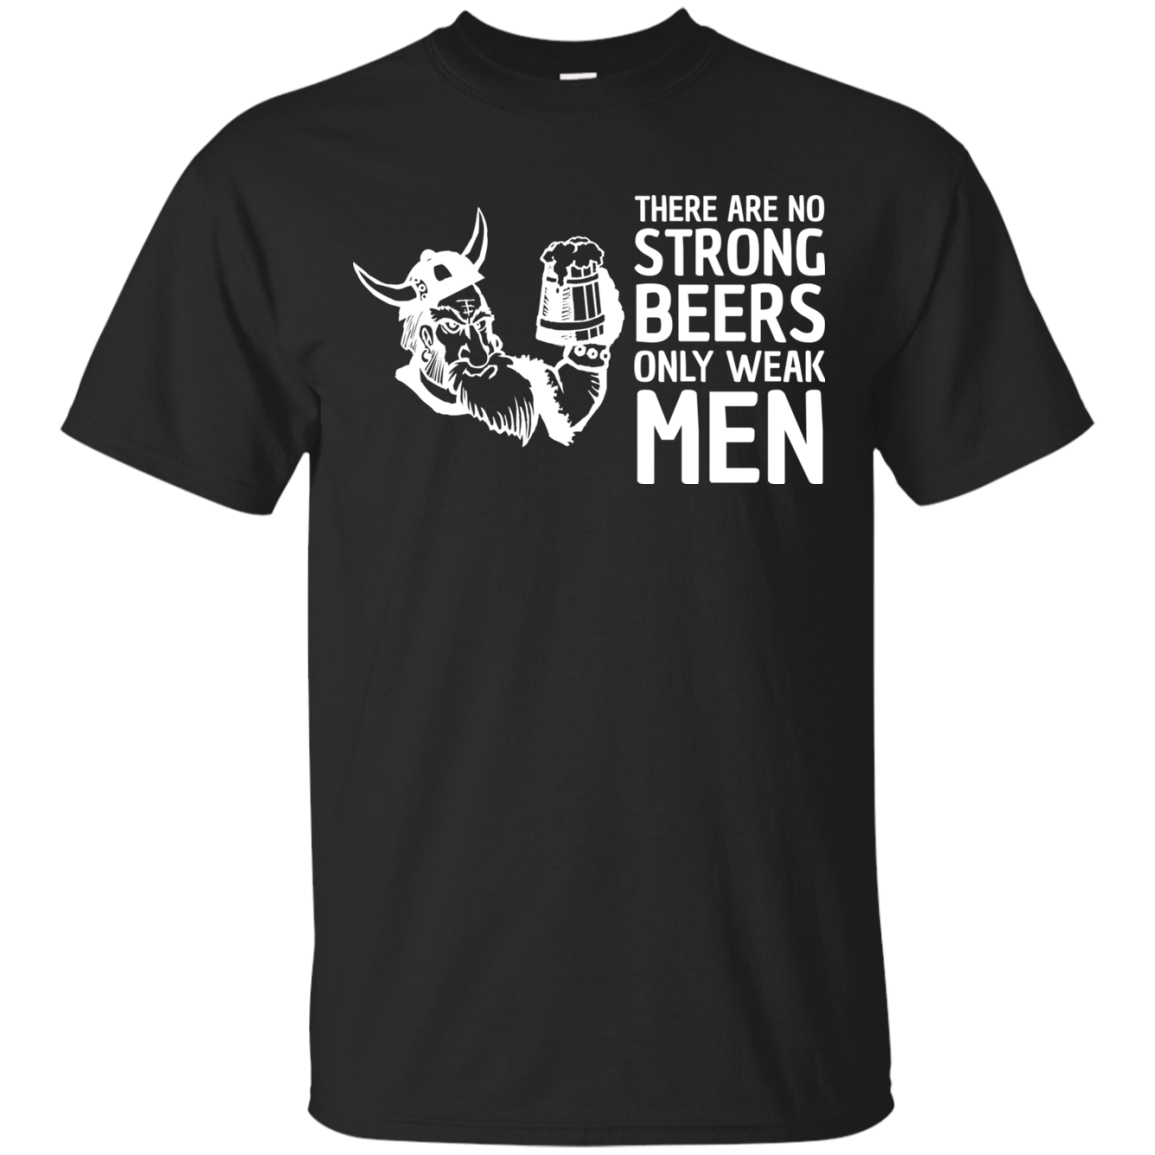 There Are No Strong Beers, Only Weak Men T-Shirt Apparel - The Beer Lodge